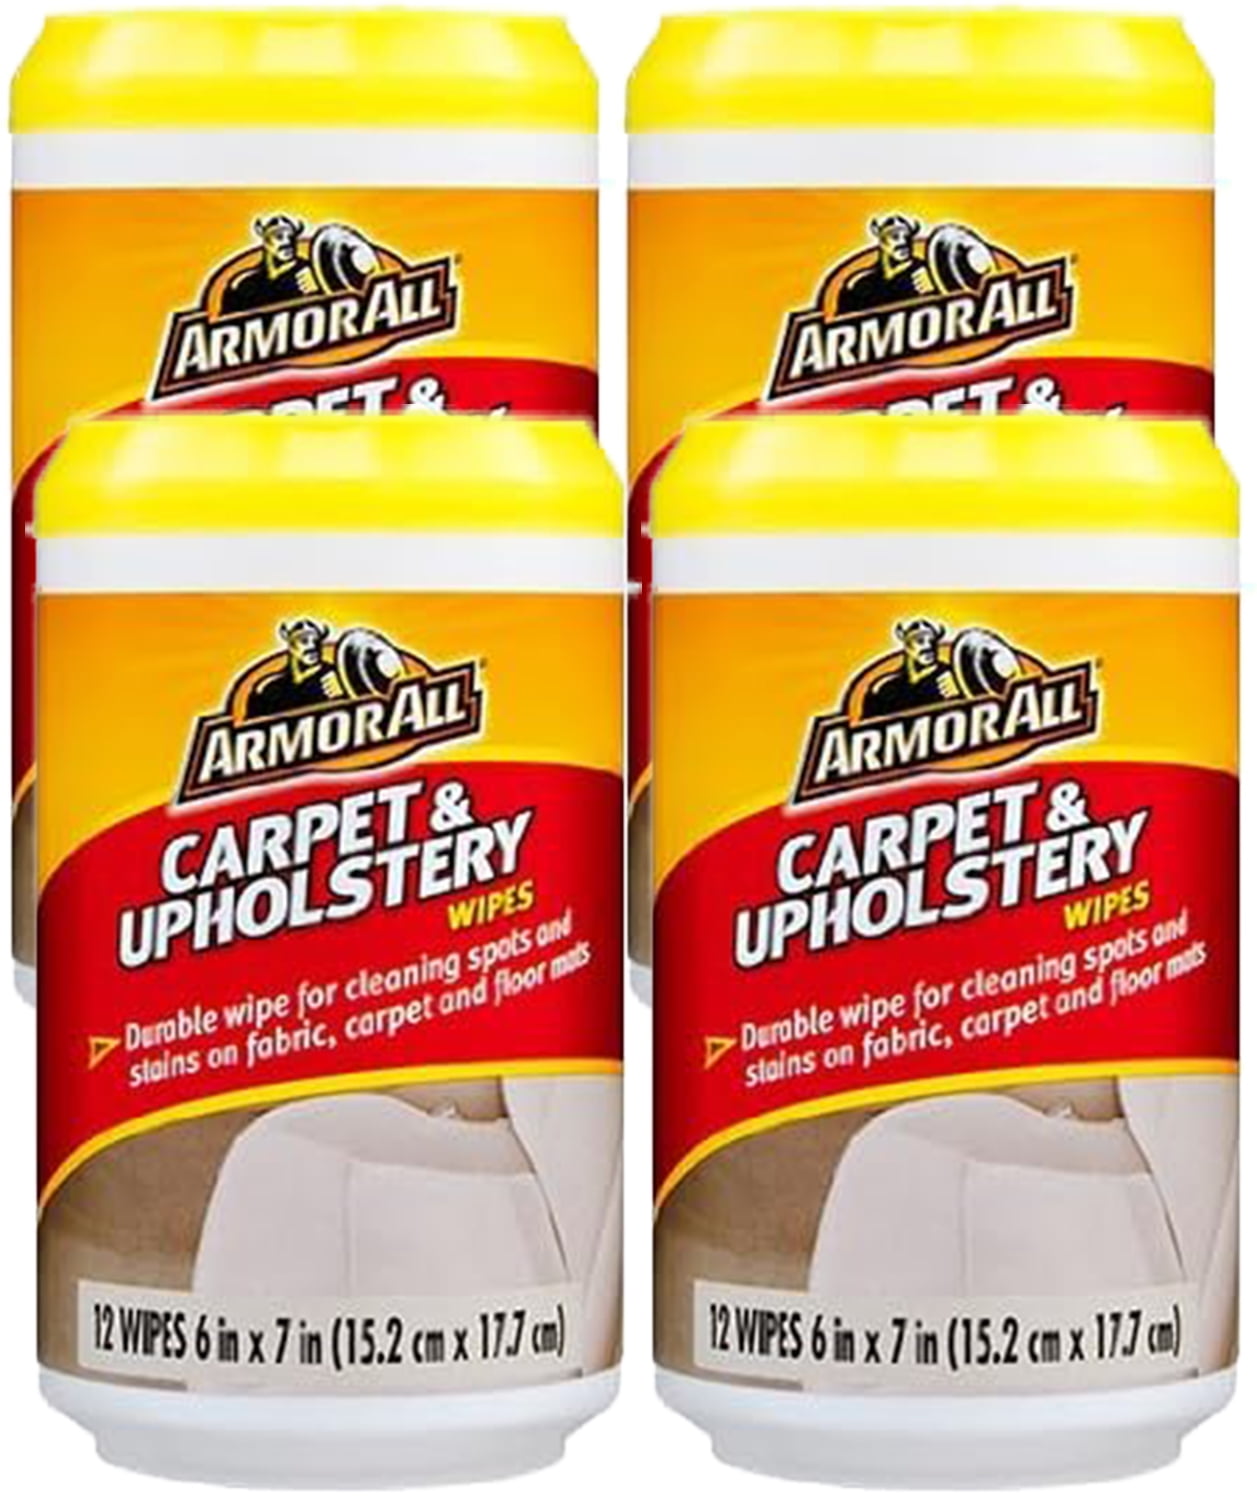 Armor All Car Interior Cleaner: Car Cleaning Supplies & Car Wipes for Quick  Clean-Up, 15 Wipes, 2 Packs by GOSO Direct